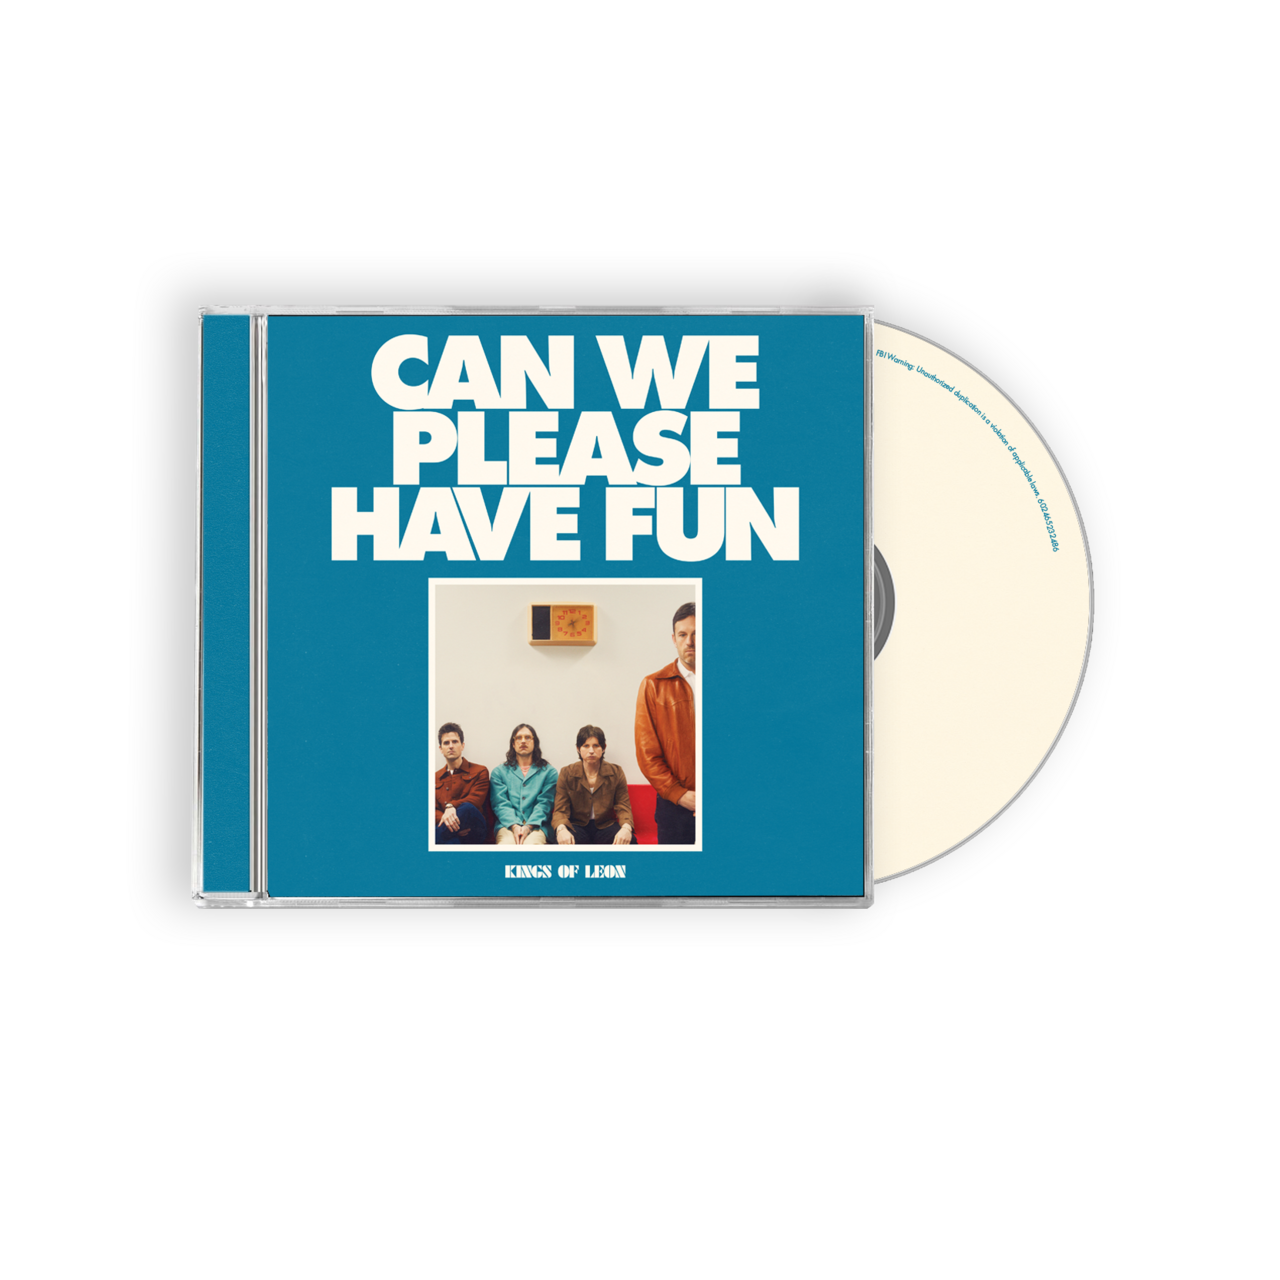 Can We Please Have Fun: Limited Silver Vinyl LP, CD + Signed Art Card